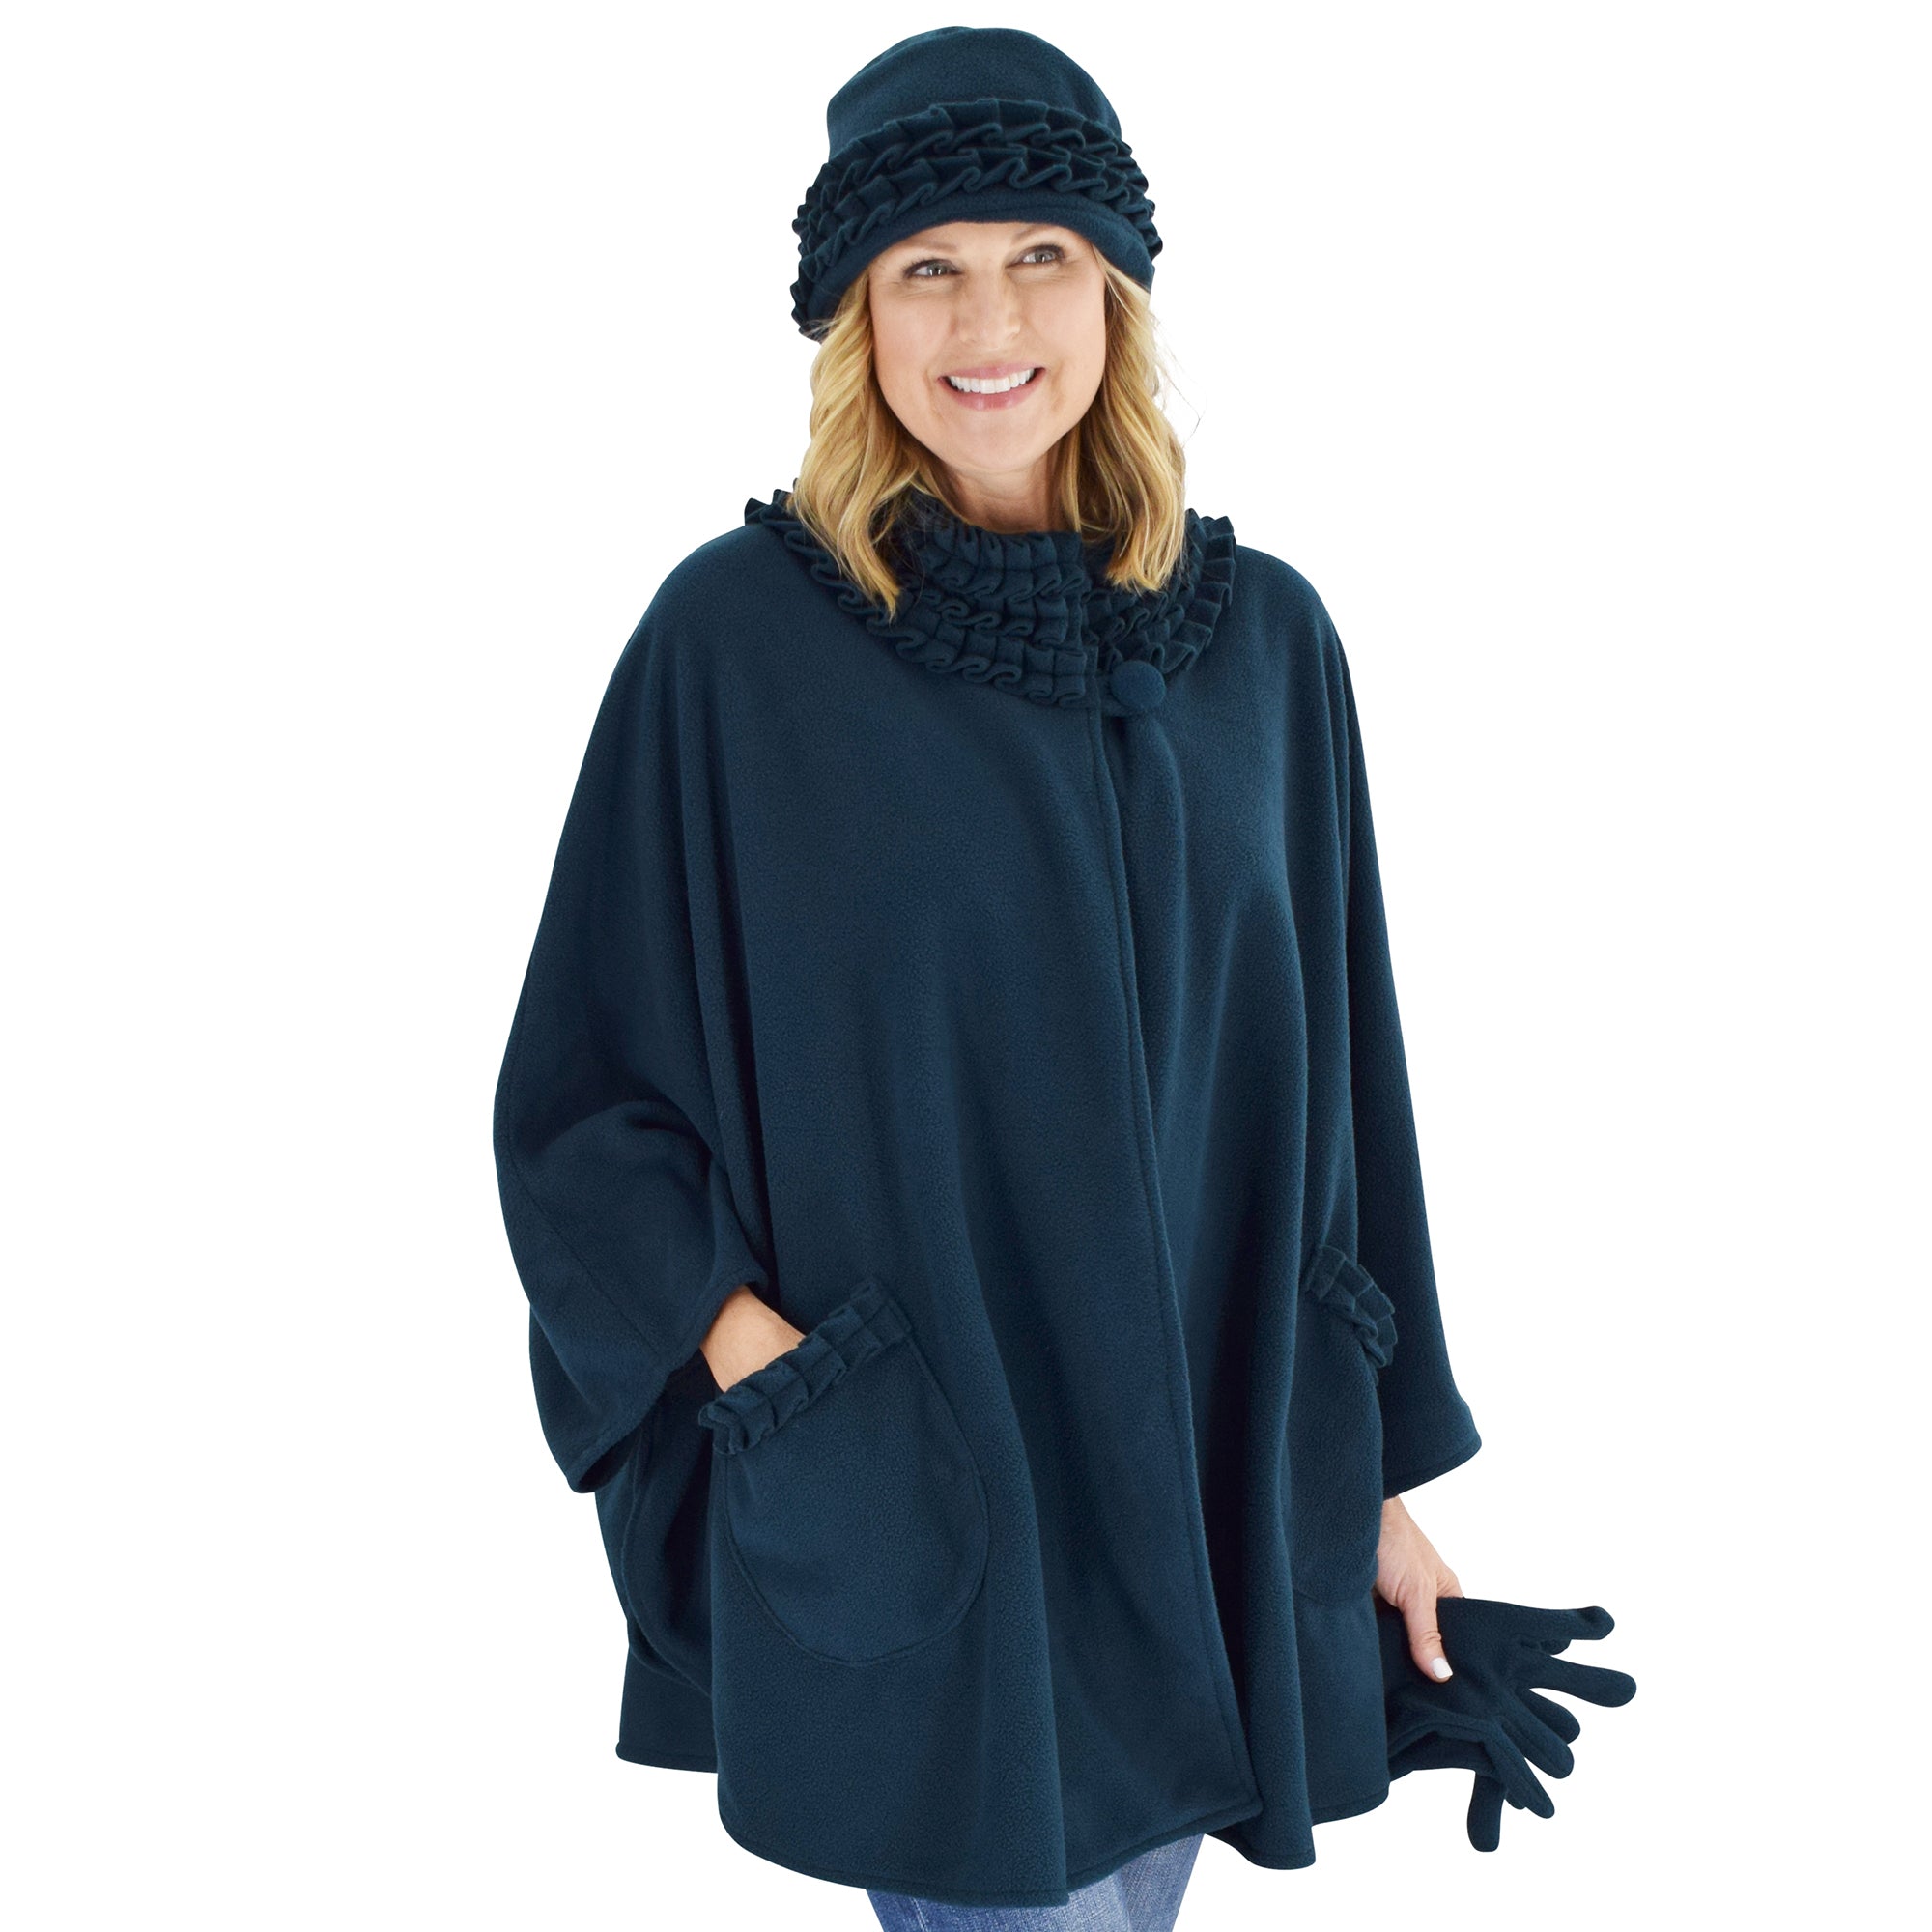 Le Moda Women's Ruffed collar Fleece Wrap with Matching Gloves and Hat - One Size Fits All at Linda Anderson. color_teal